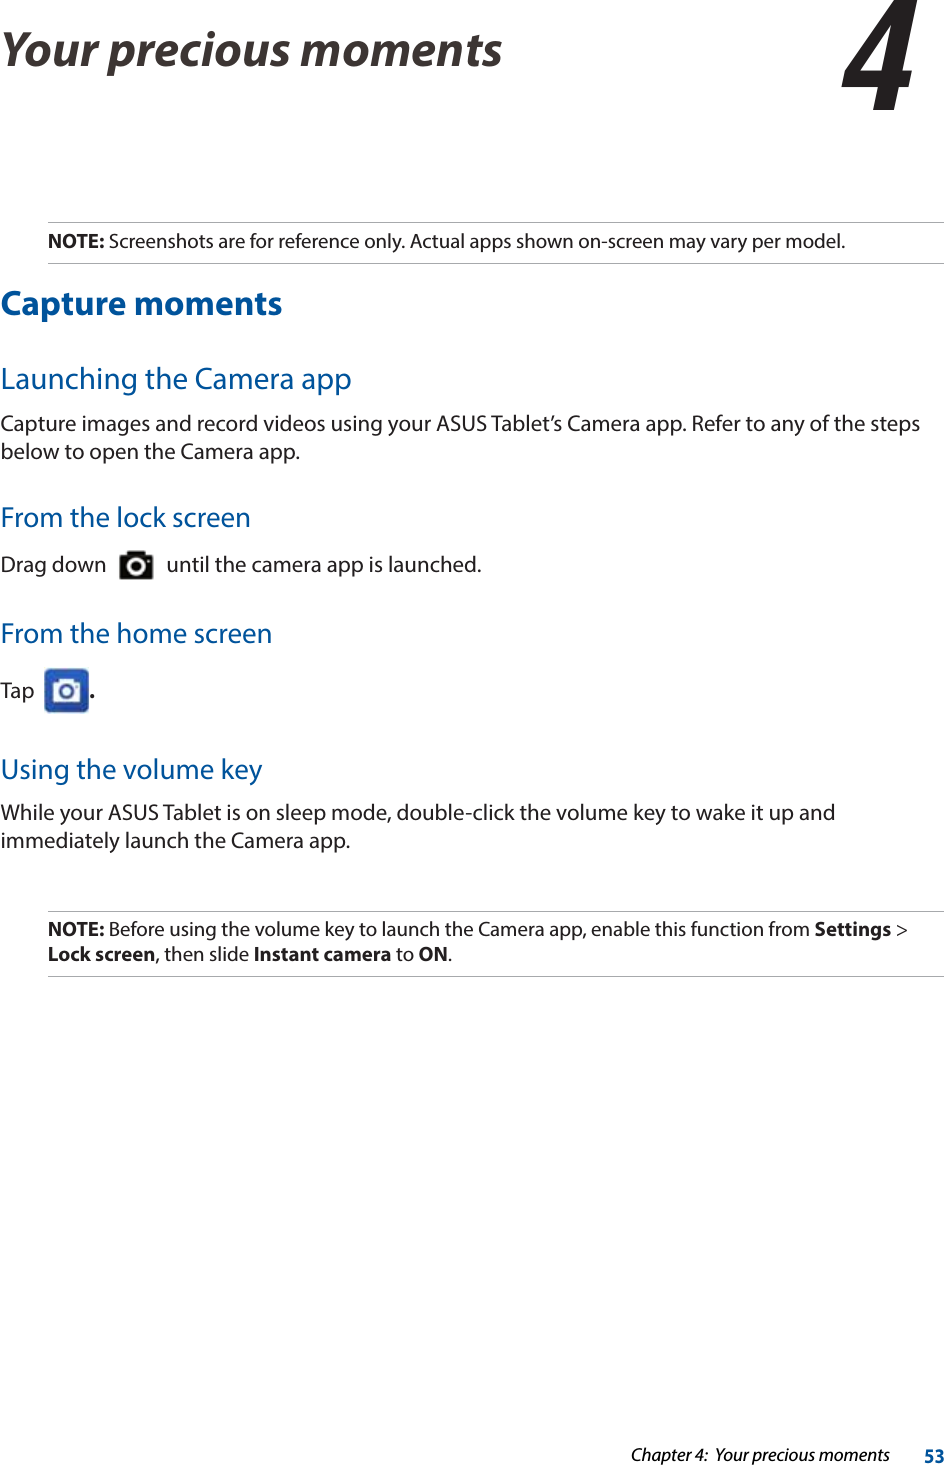 Chapter 4:  Your precious moments53Your precious moments 44  Your precious momentsNOTE: Screenshots are for reference only. Actual apps shown on-screen may vary per model. Capture momentsLaunching the Camera appCapture images and record videos using your ASUS Tablet’s Camera app. Refer to any of the steps below to open the Camera app.From the lock screenDrag down     until the camera app is launched.From the home screenTap   .Using the volume keyWhile your ASUS Tablet is on sleep mode, double-click the volume key to wake it up and immediately launch the Camera app. NOTE: Before using the volume key to launch the Camera app, enable this function from Settings &gt; Lock screen, then slide Instant camera to ON.